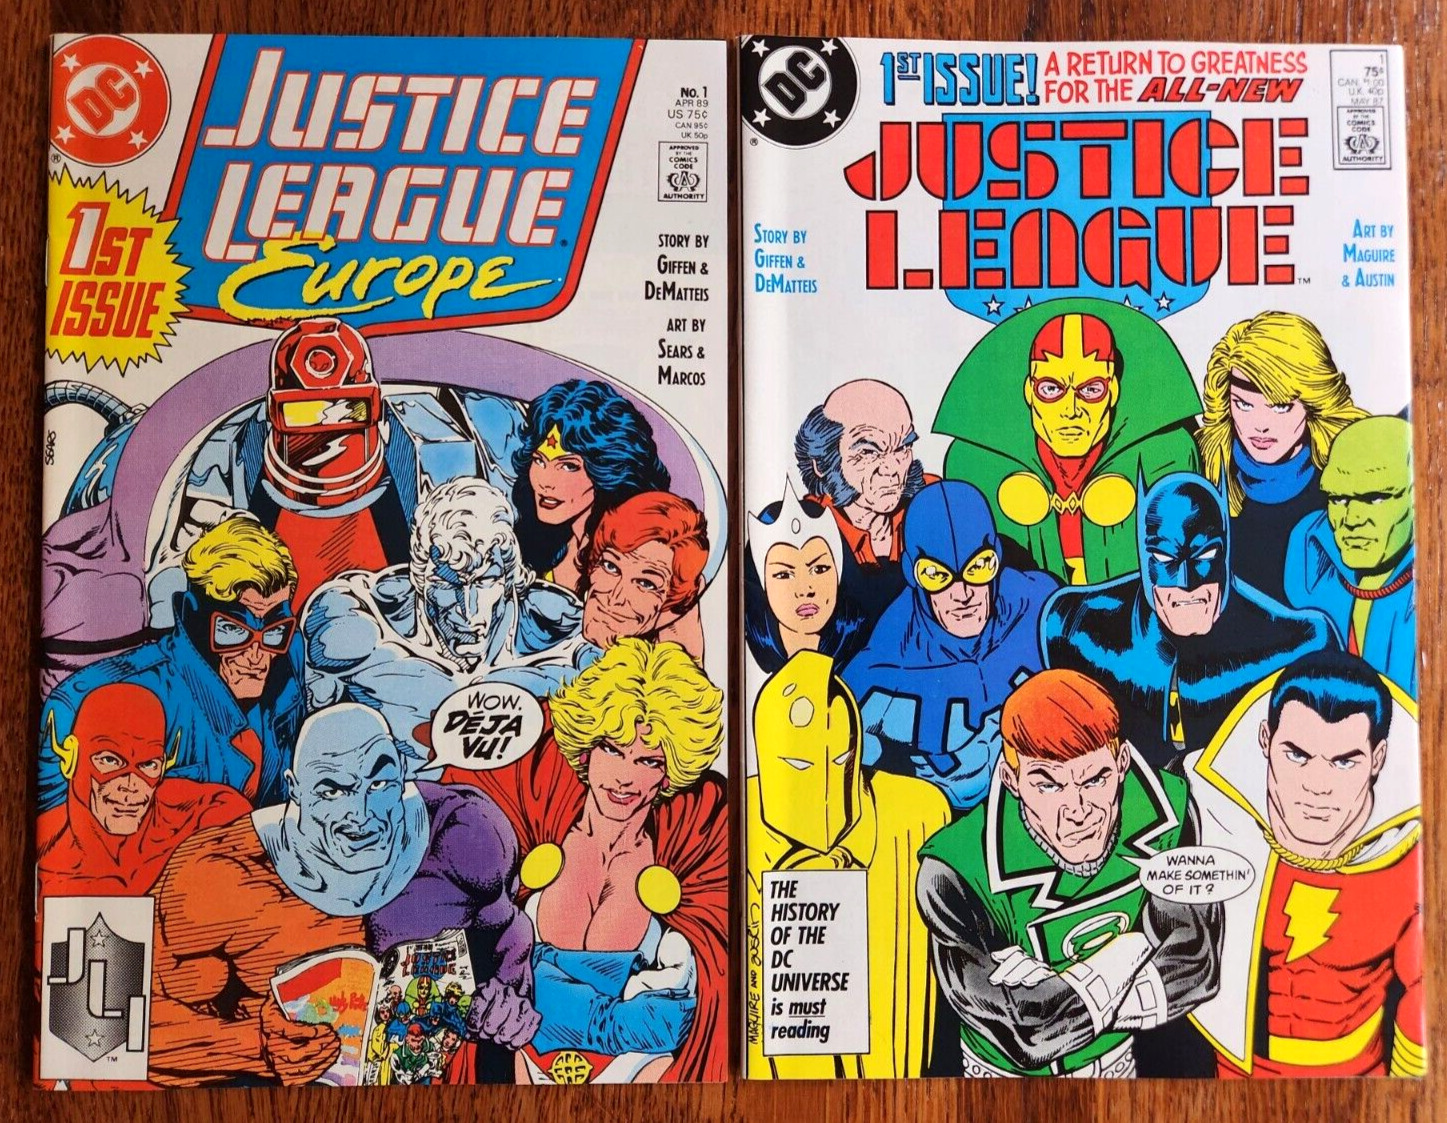 JUSTICE LEAGUE #1 +JUSTICE LEAGUE EUROPE #1 (LOT of TWO) 1987-89, NEW, Near Mint